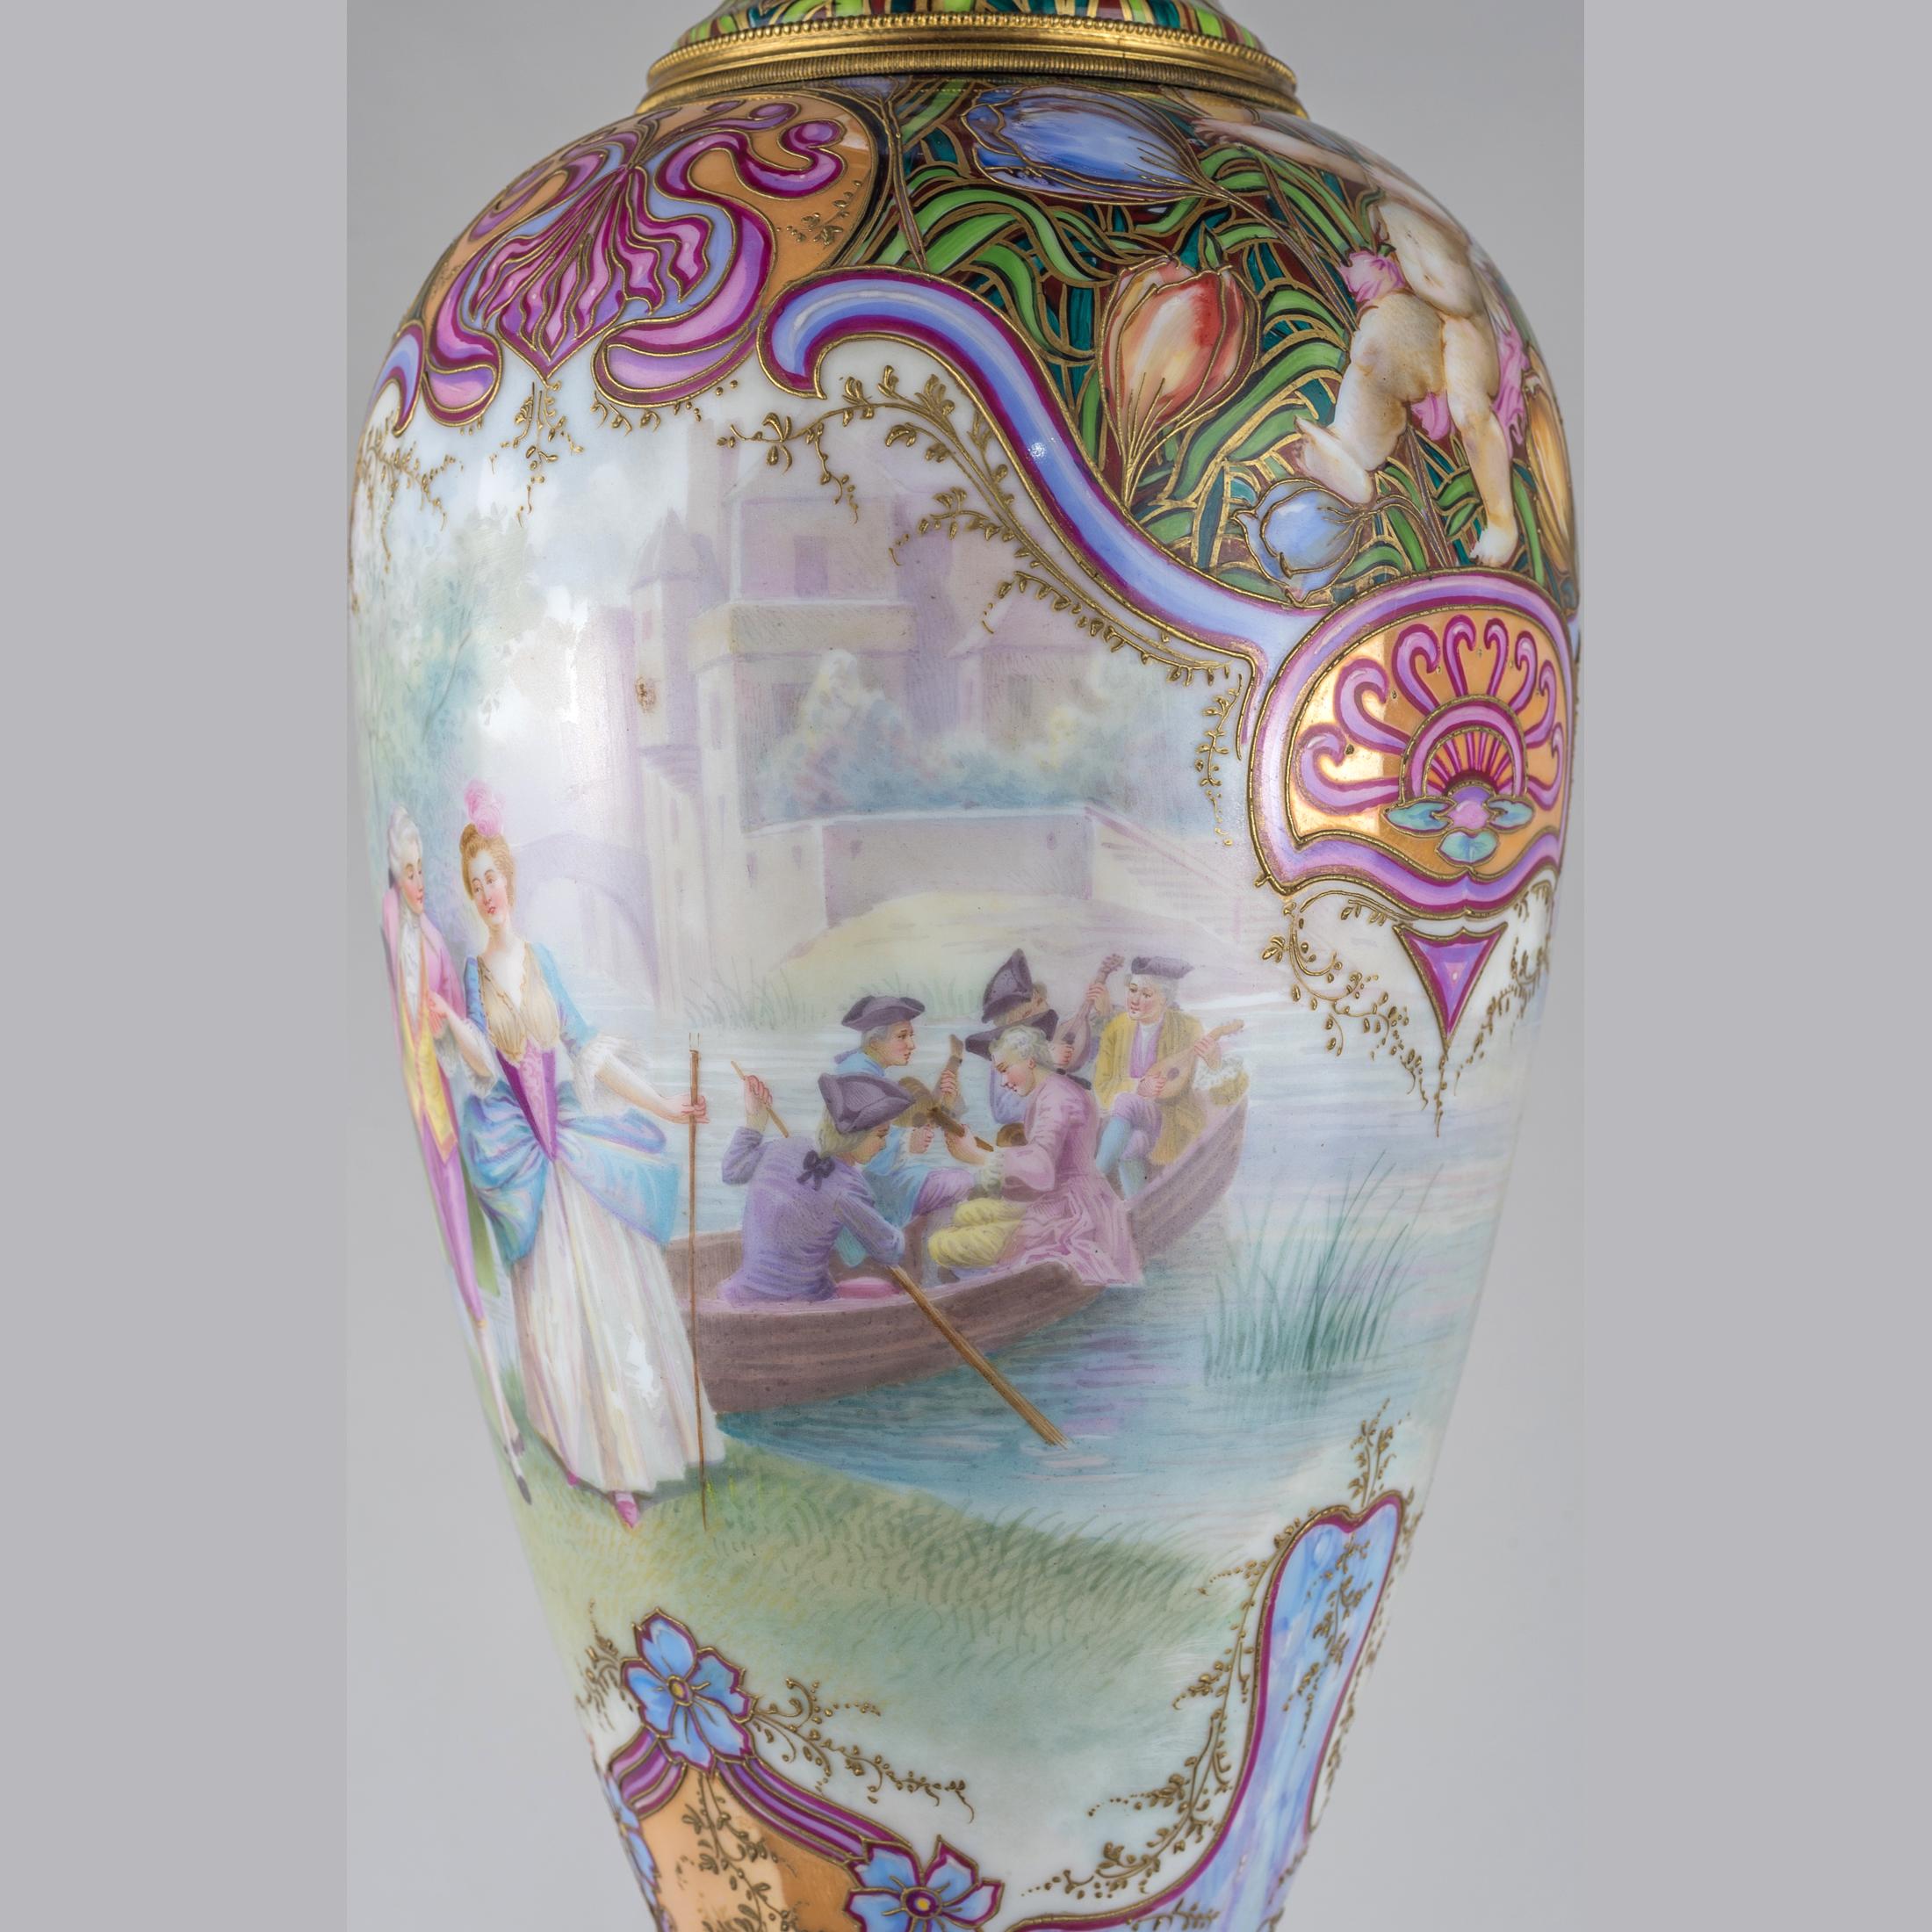 19th Century Sèvres Style Gilt Porcelain Iridescent Glaze Portrait Vase In Good Condition For Sale In New York, NY